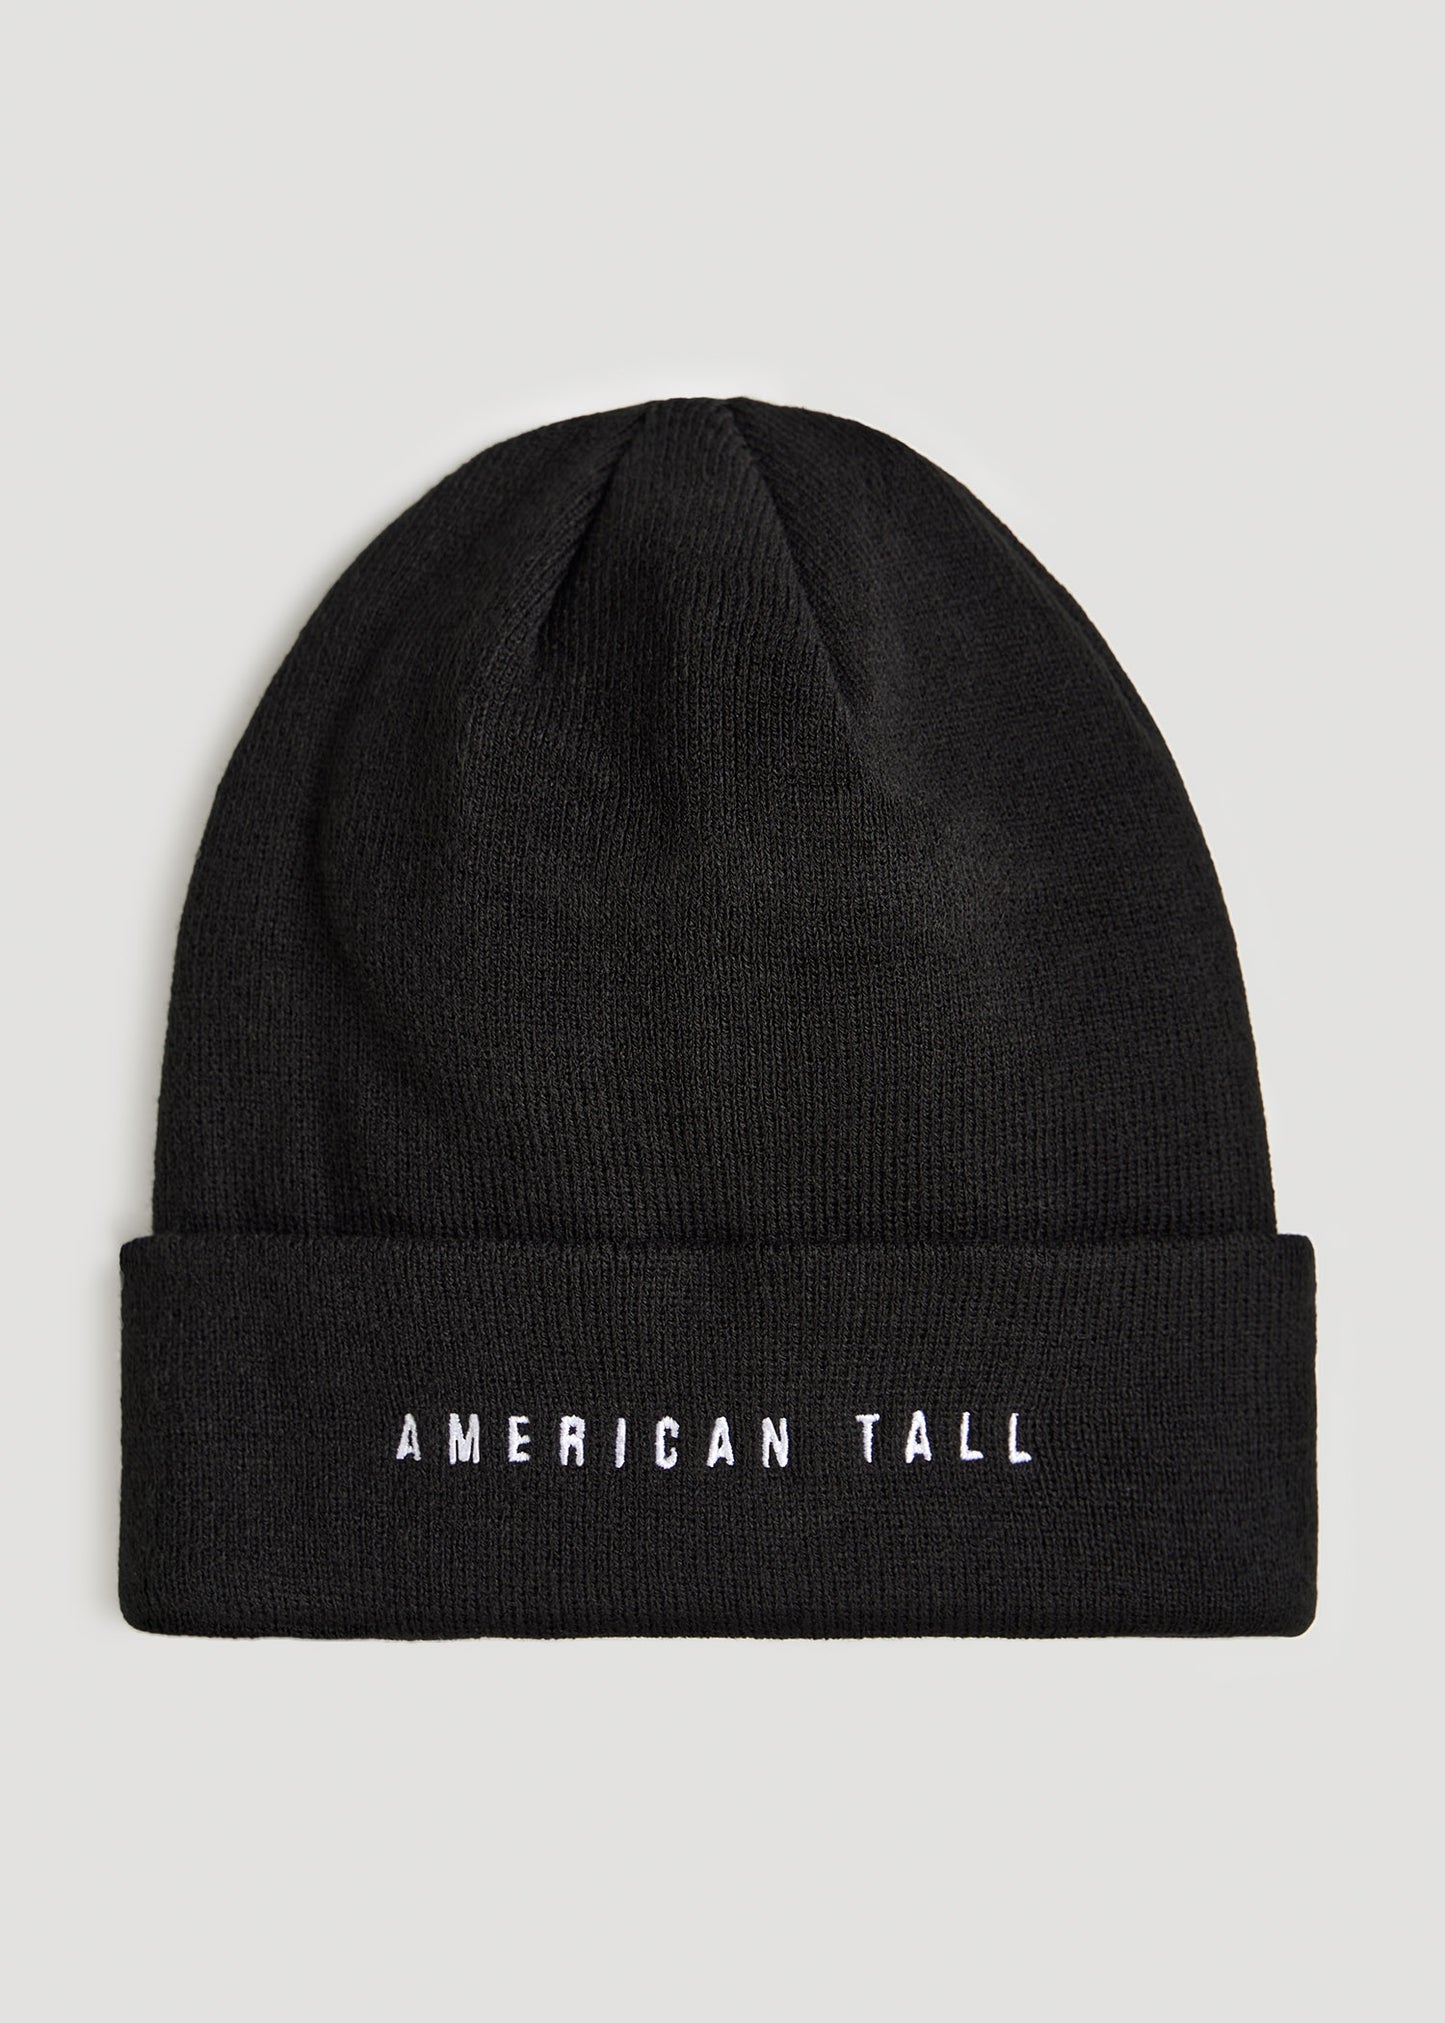    American-Tall-Knit-Beanie-in-Black-One-Size-Fits-All-Black-front